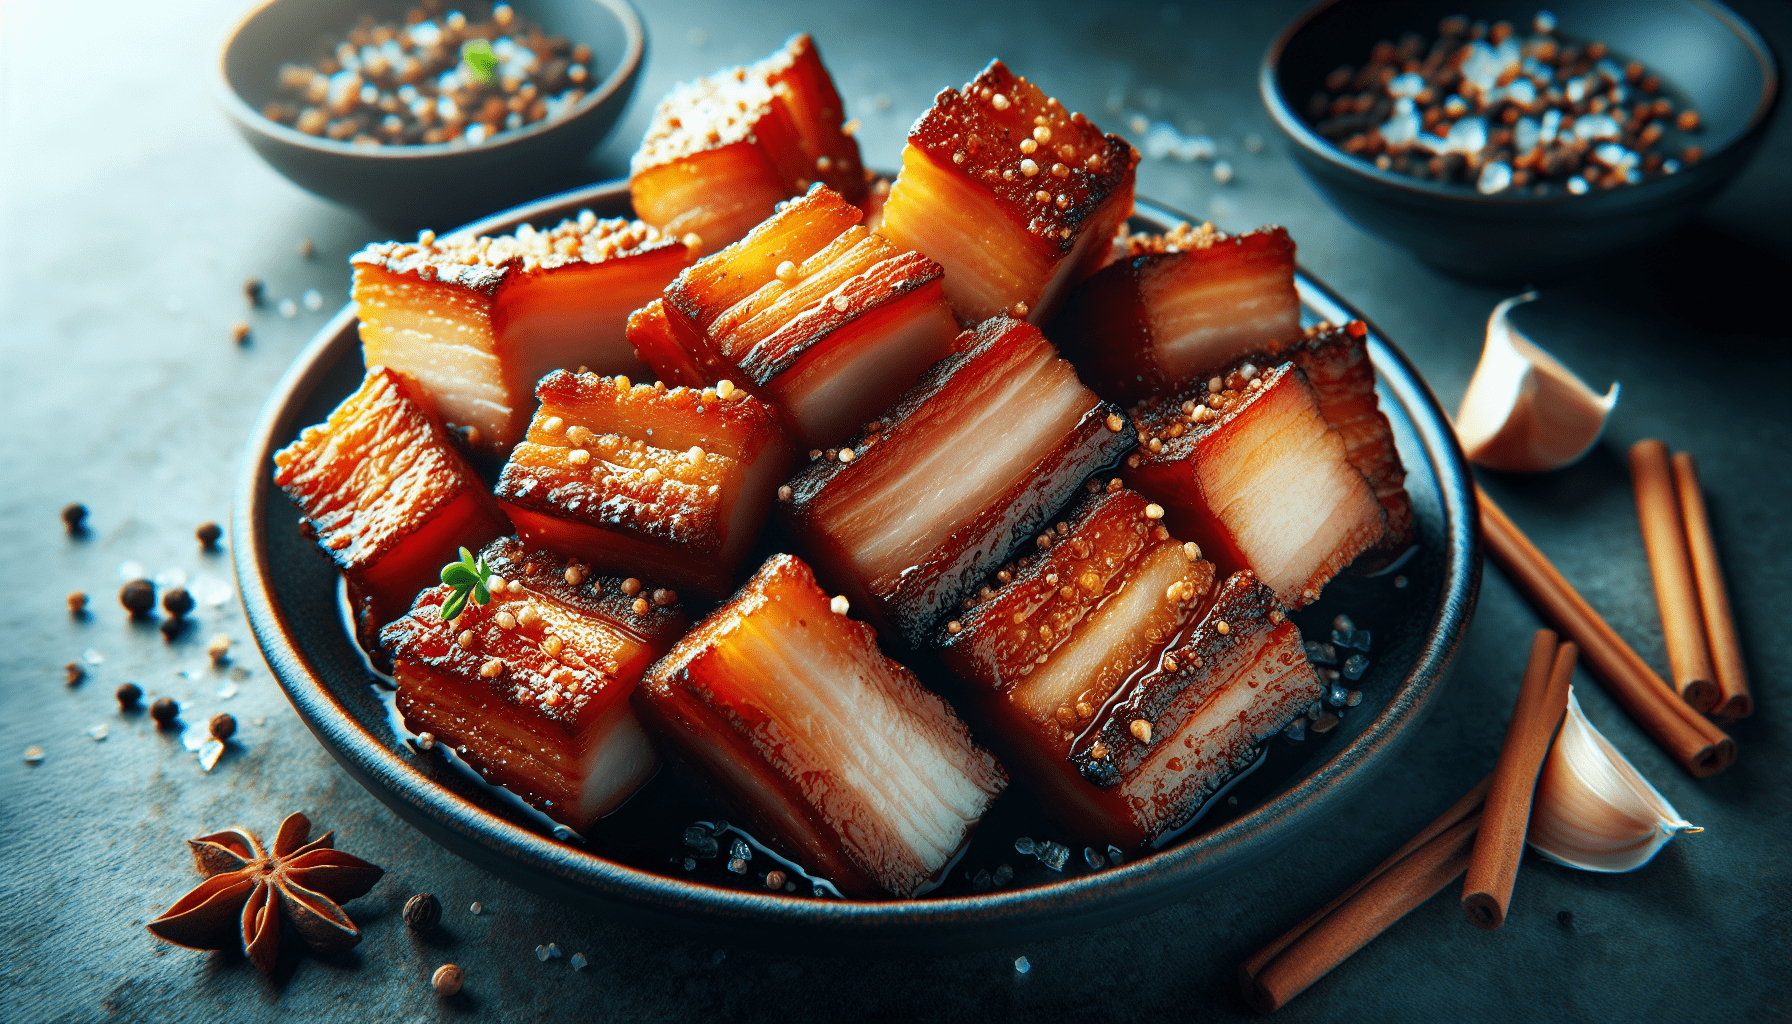 Delicious Pork Belly Recipes to Indulge In